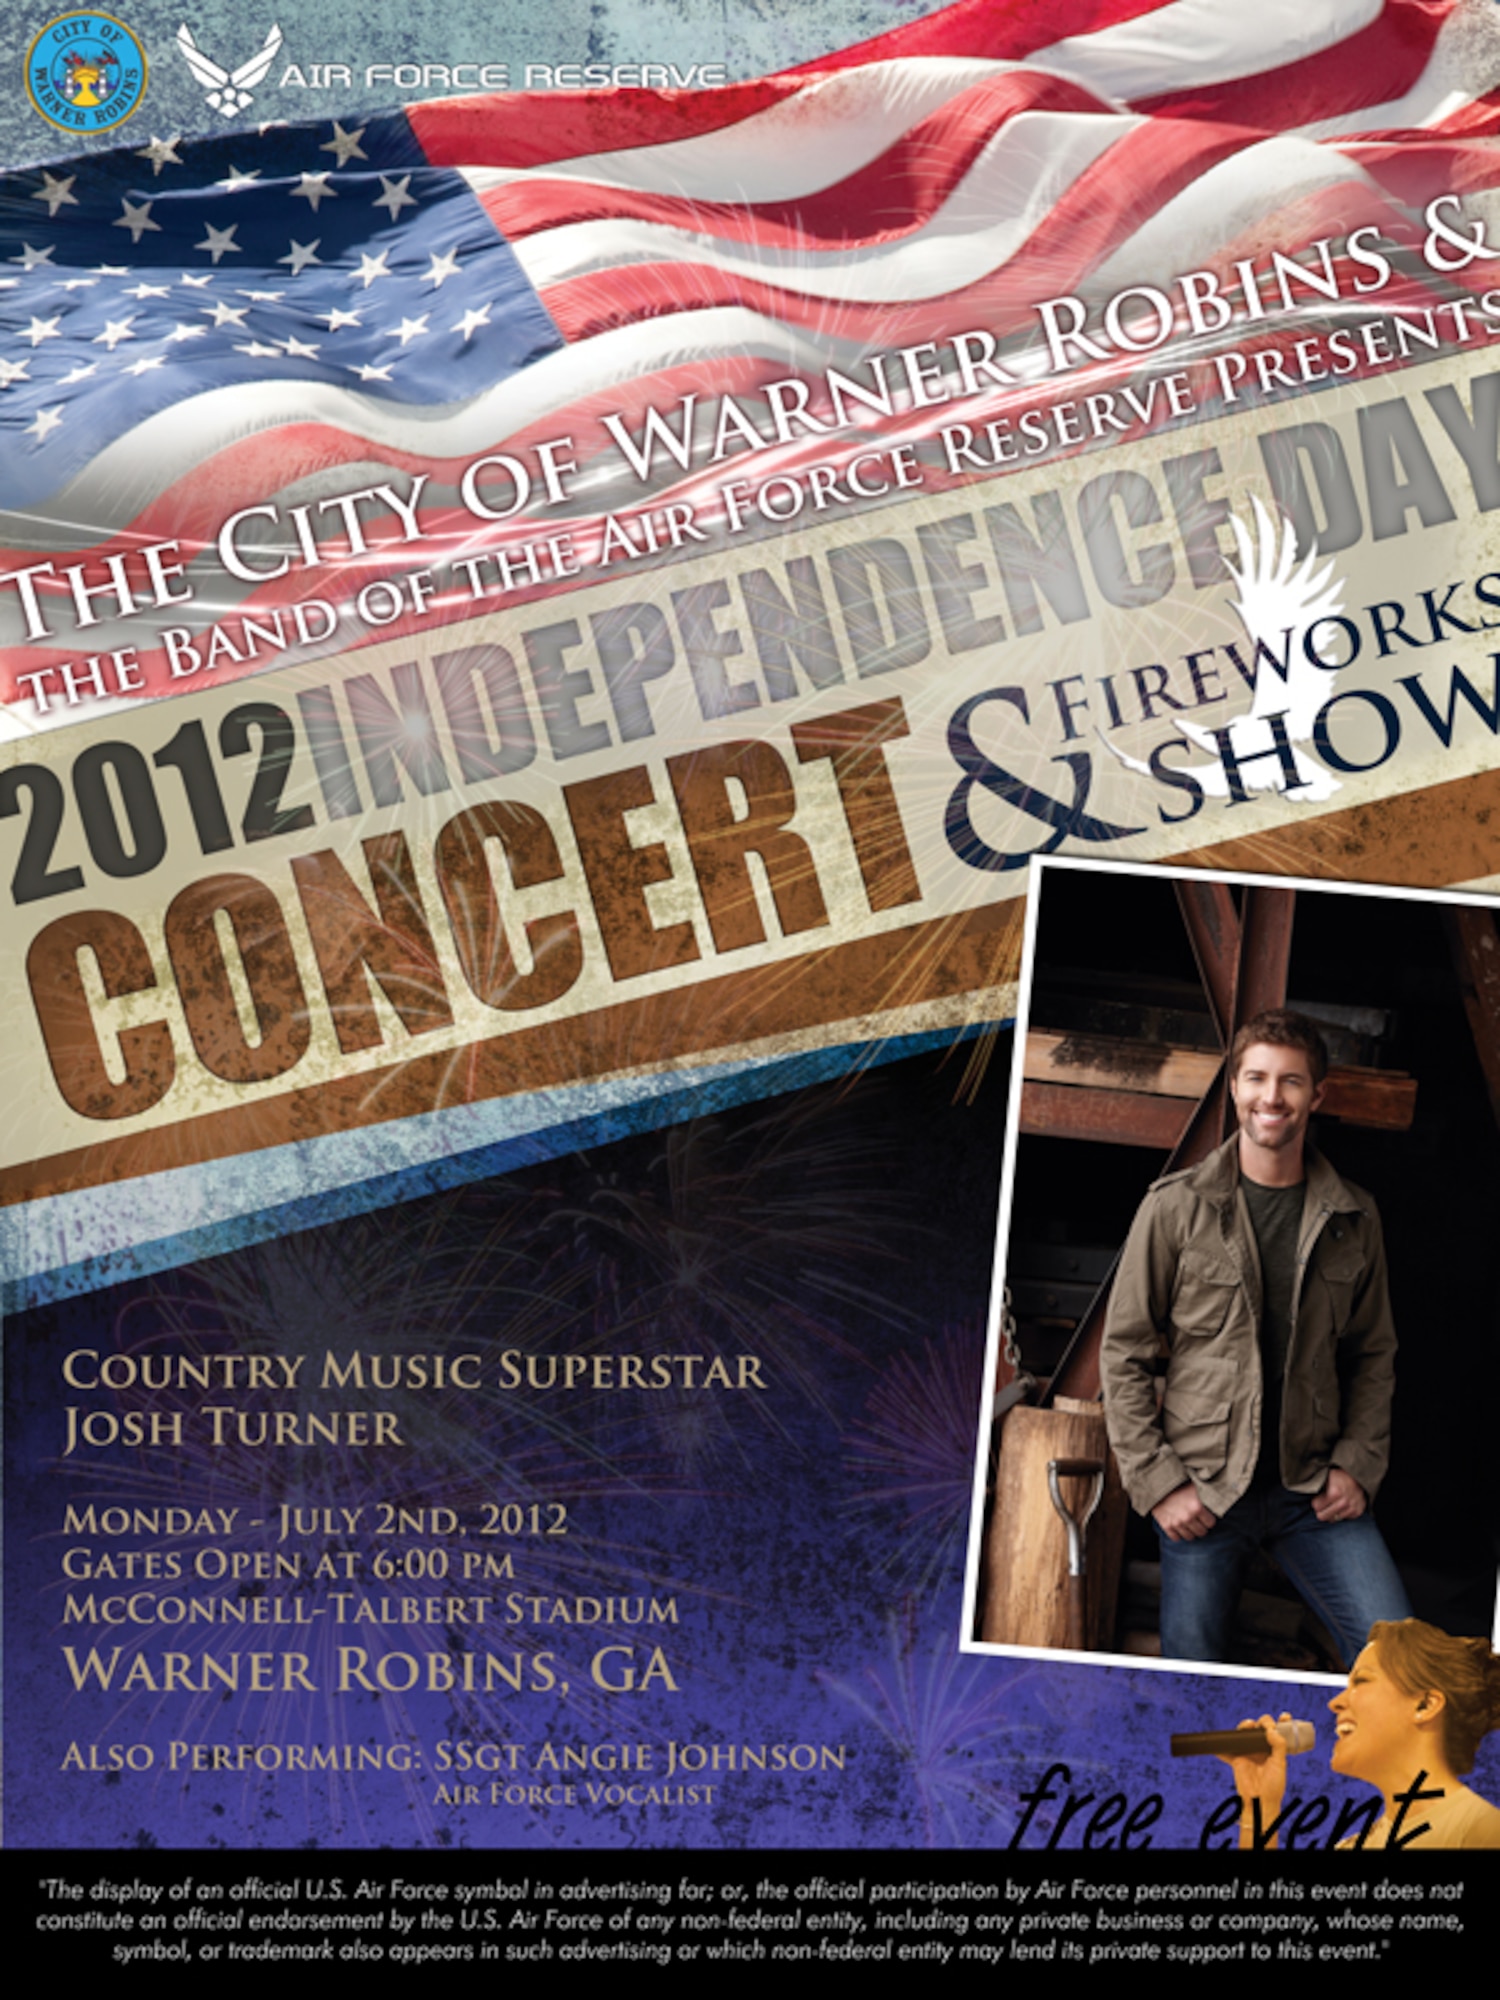 Country superstar Josh Turner will headline the Independence Day Celebration at McConnell Talbert Memorial Stadium on July 2. Turner's fourth number-one single "All Over Me" was named 2011 BMI Song of the Year. Also performing will be Staff Sgt. Angie Johnson, performing with the Band of the U.S. Air Force Reserve. Johnson, a member of the Missouri Air National Guard, rose to fame when the Guard band was featured in a video that went viral on YouTube, drawing more than 1.2 million hits. That video led to her appearance on late-night talk shows, The Voice television show as well as the Guard band's performance at the White House. (U.S. Air Force photo/Staff Sgt. Alexi Saltekoff)